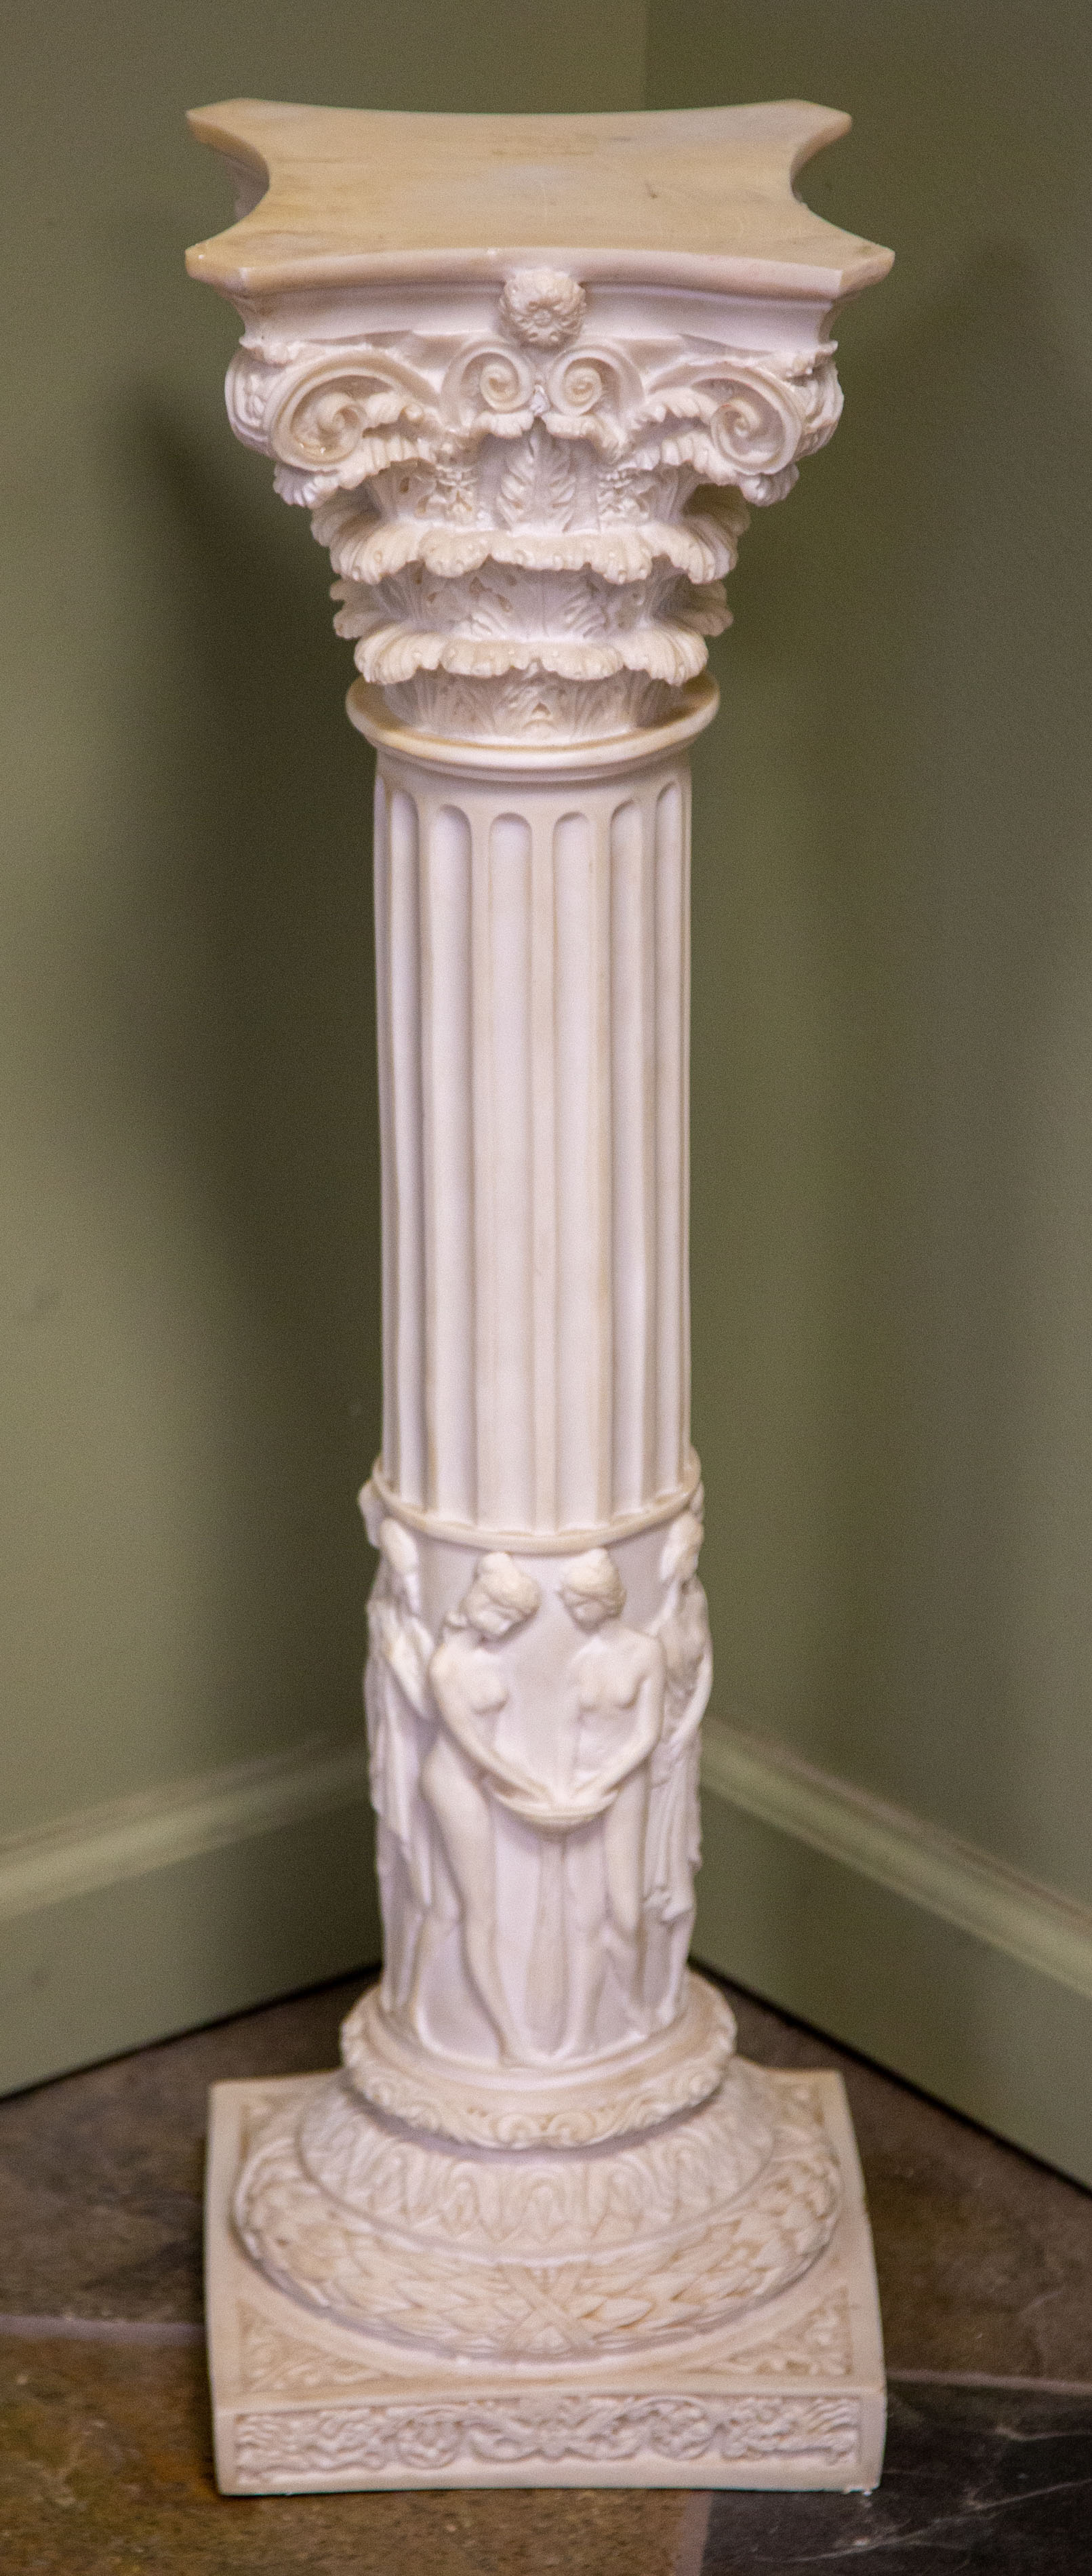 (2) COMPOSITION PEDESTAL WITH CLASSICAL